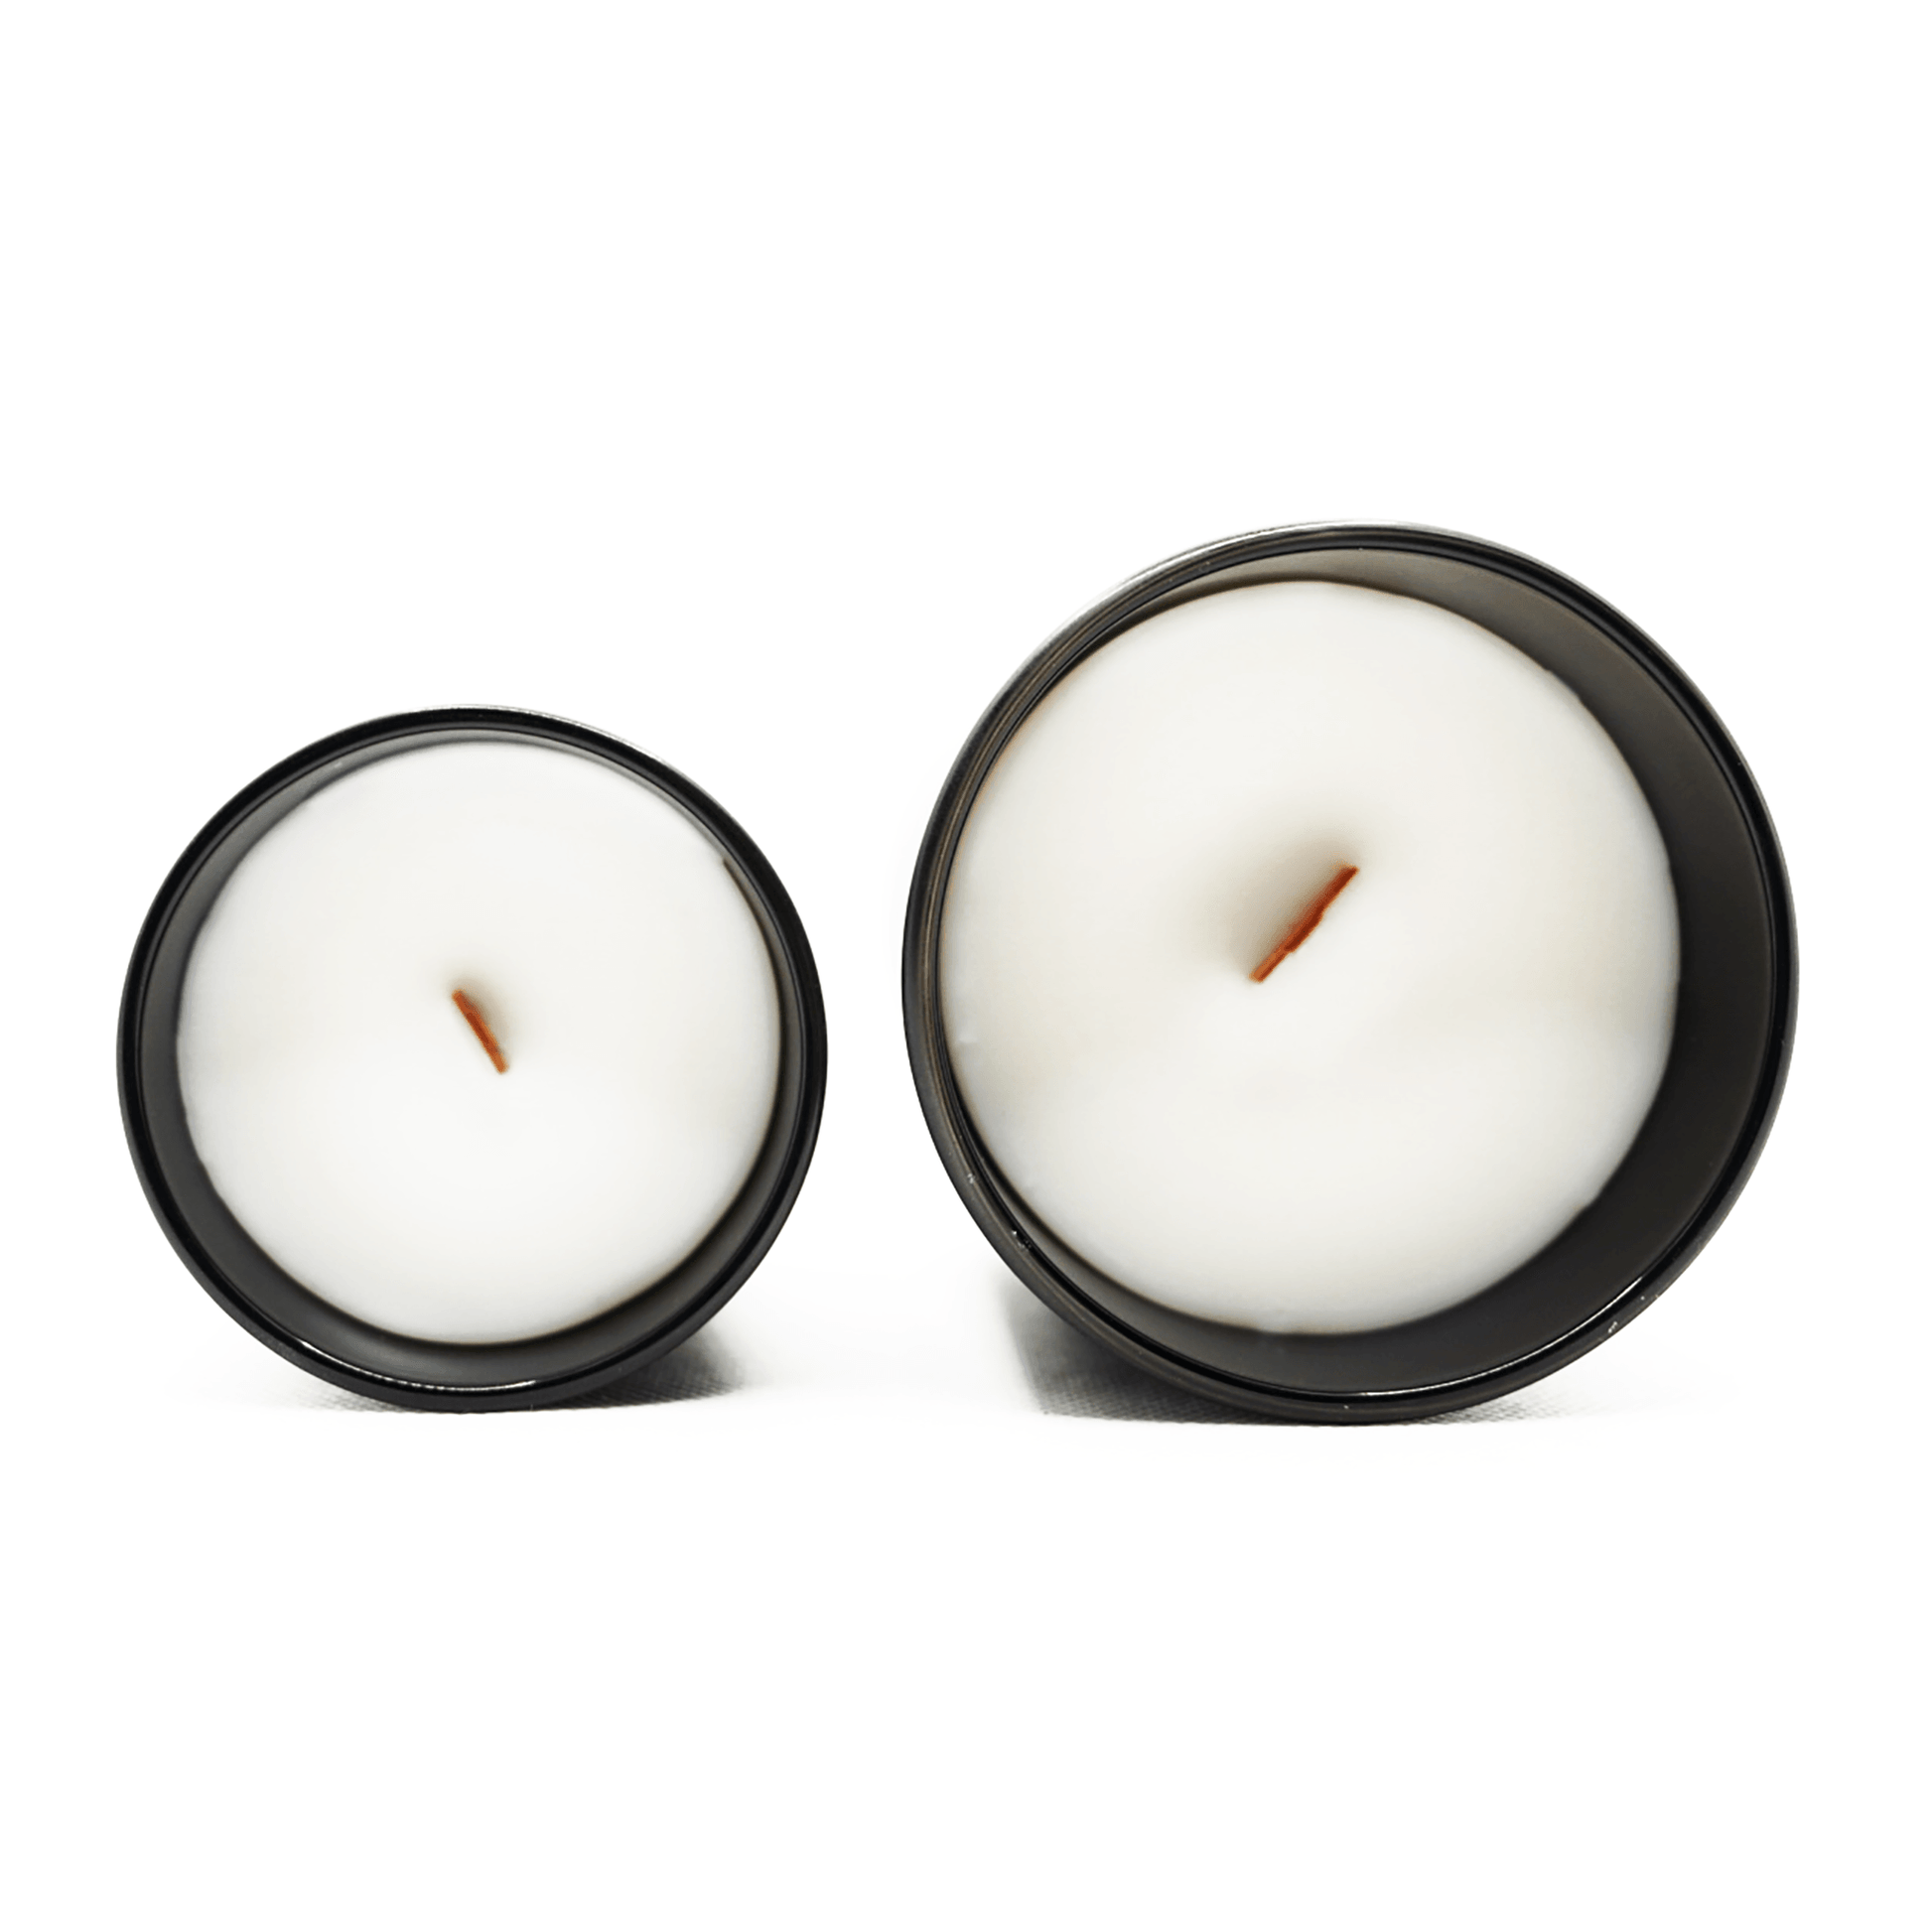 Blow Me - Woodwick Candle - BADWAX